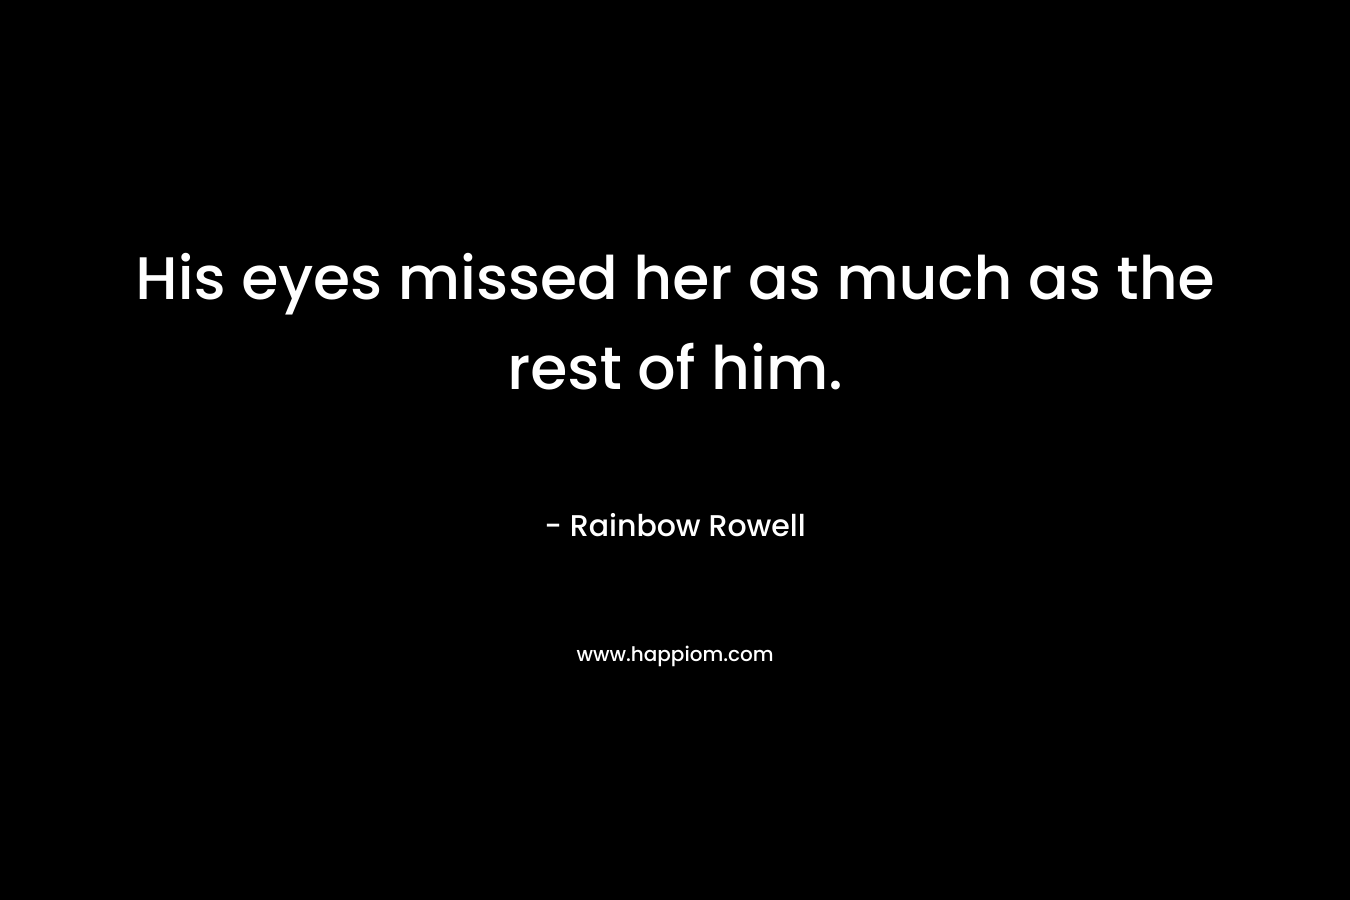 His eyes missed her as much as the rest of him.